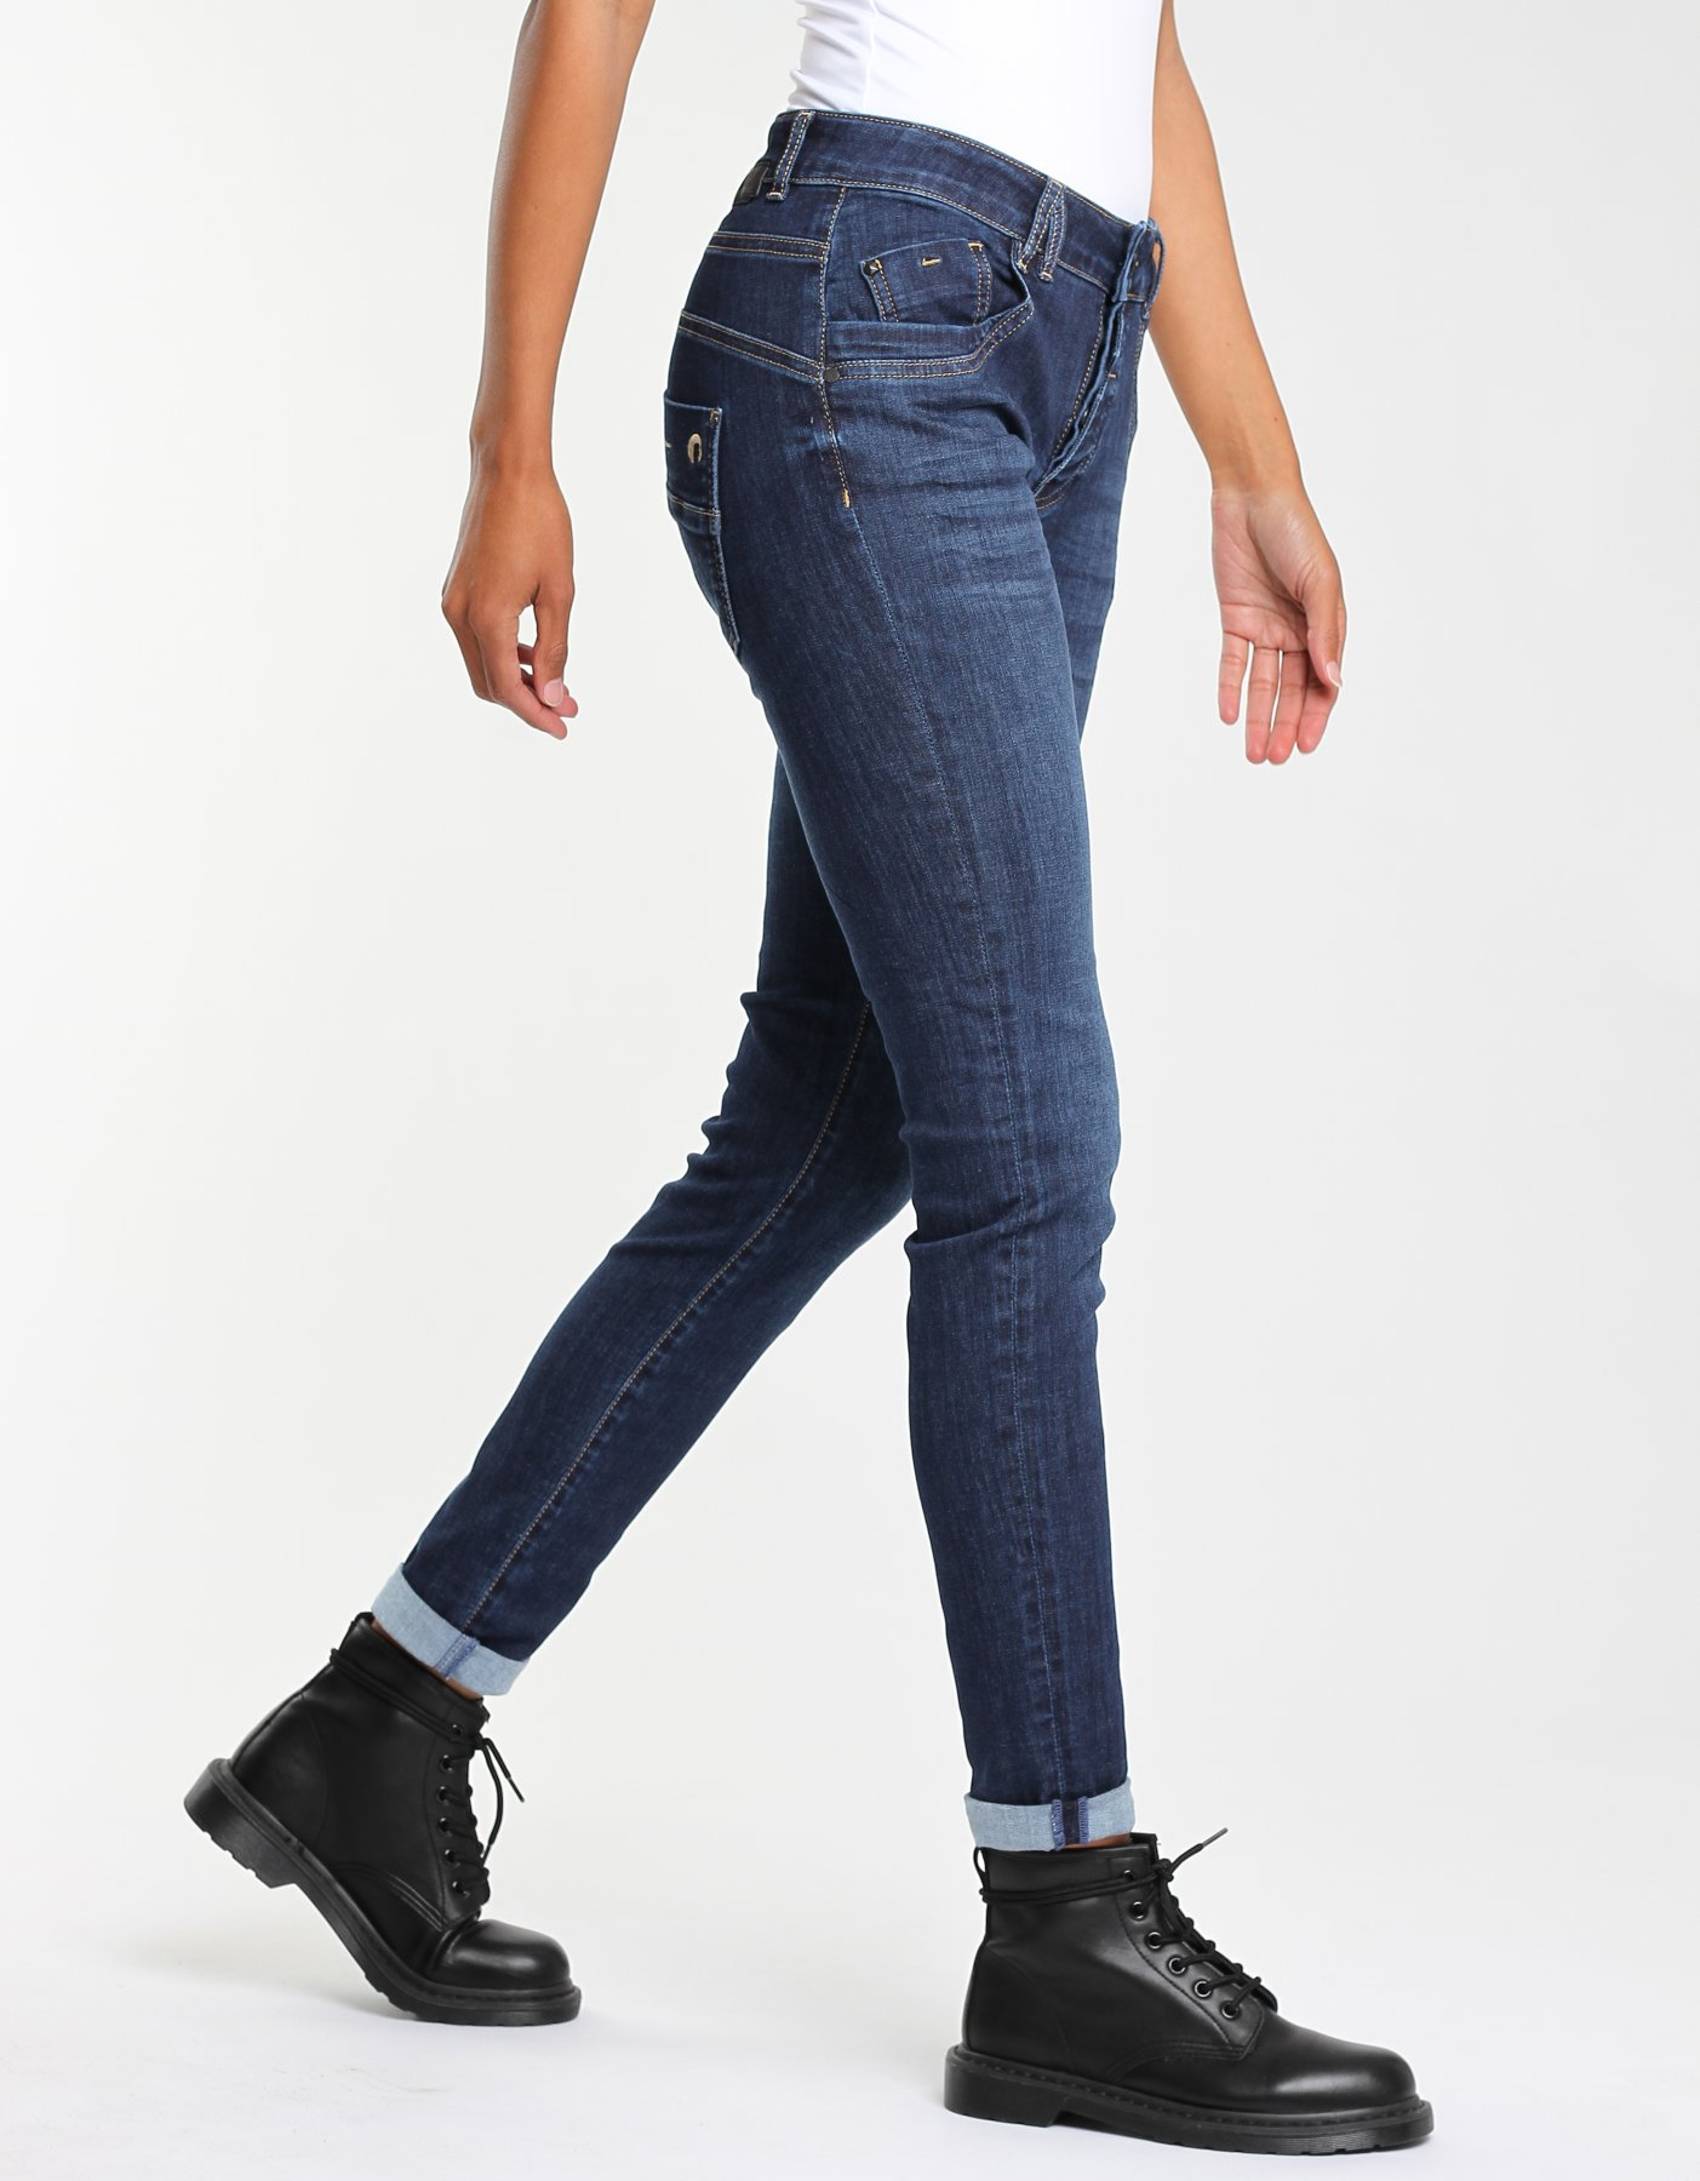 94Gerda - relaxed fit Jeans | GANG